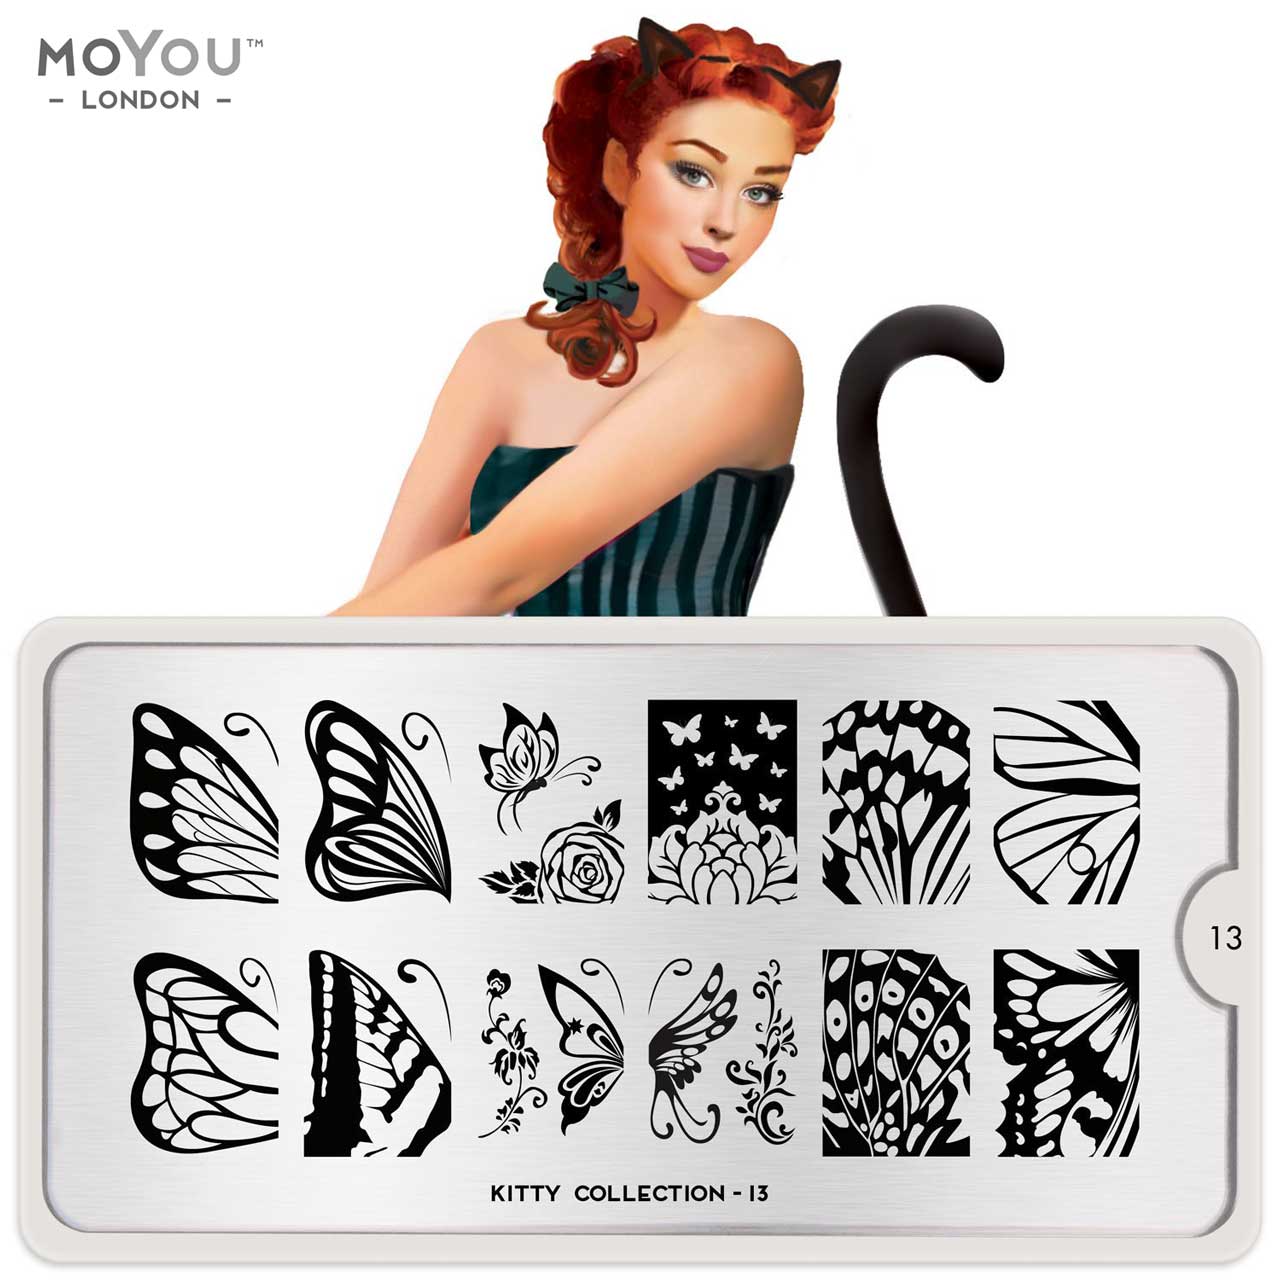 Plaque Stamping Kitty 13 - MoYou London